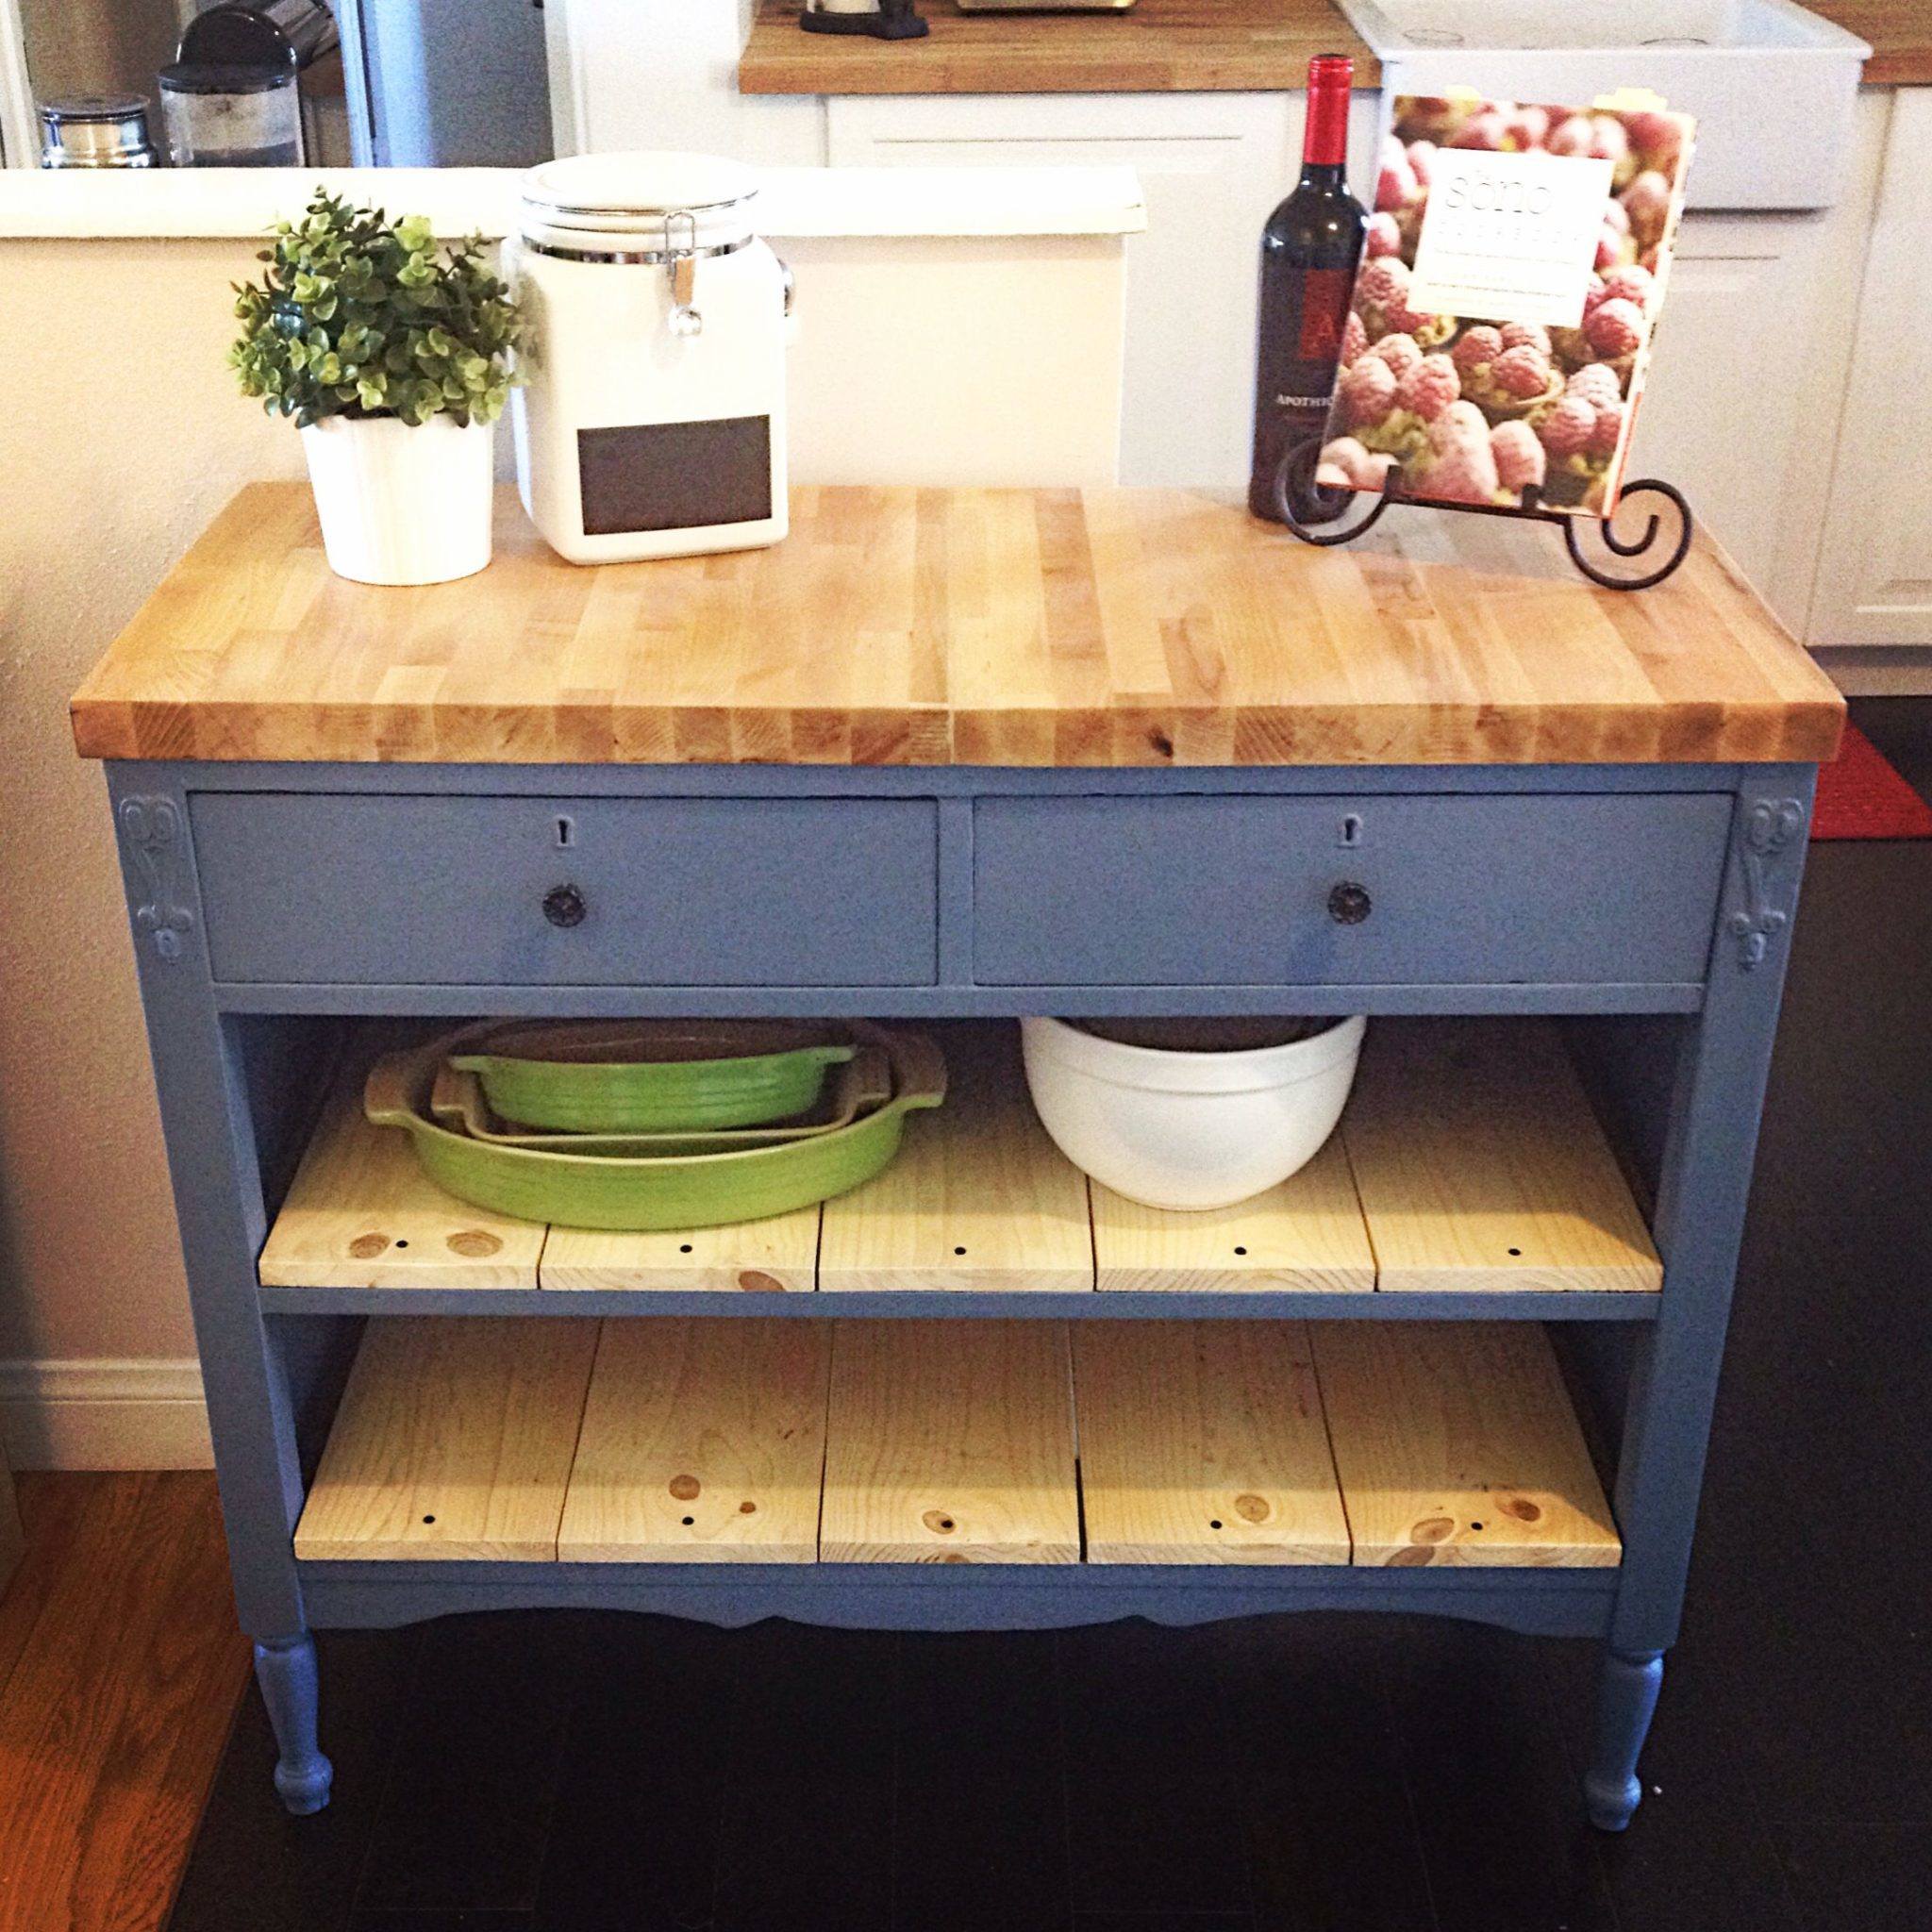 Upcycle An Old Dresser Into A Kitchen Island For Budget Beauty The Money Pit